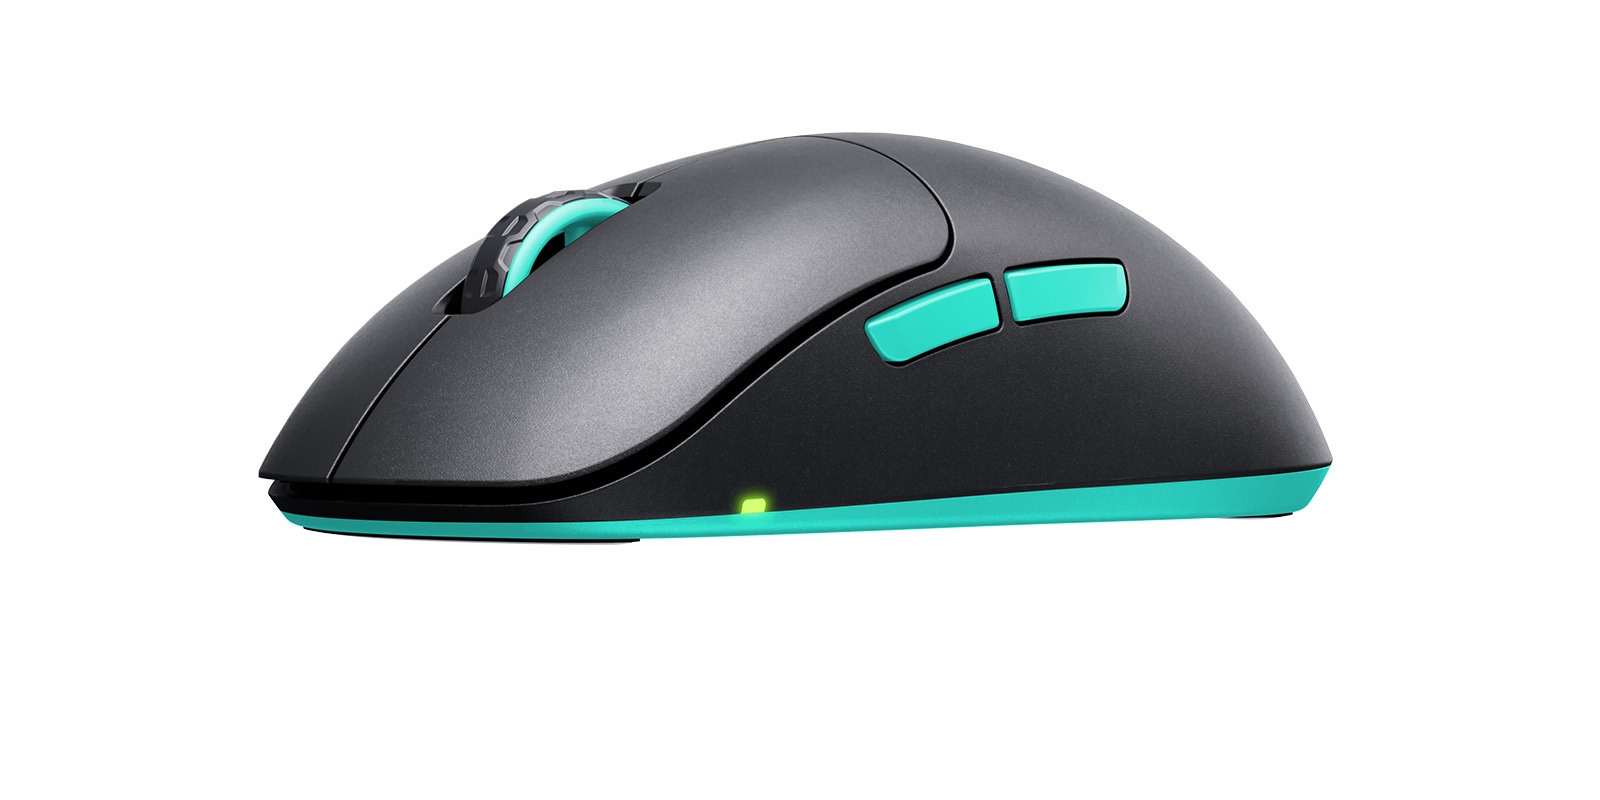 Cherry Xtrfy M8 Wireless - Most original gaming mouse design